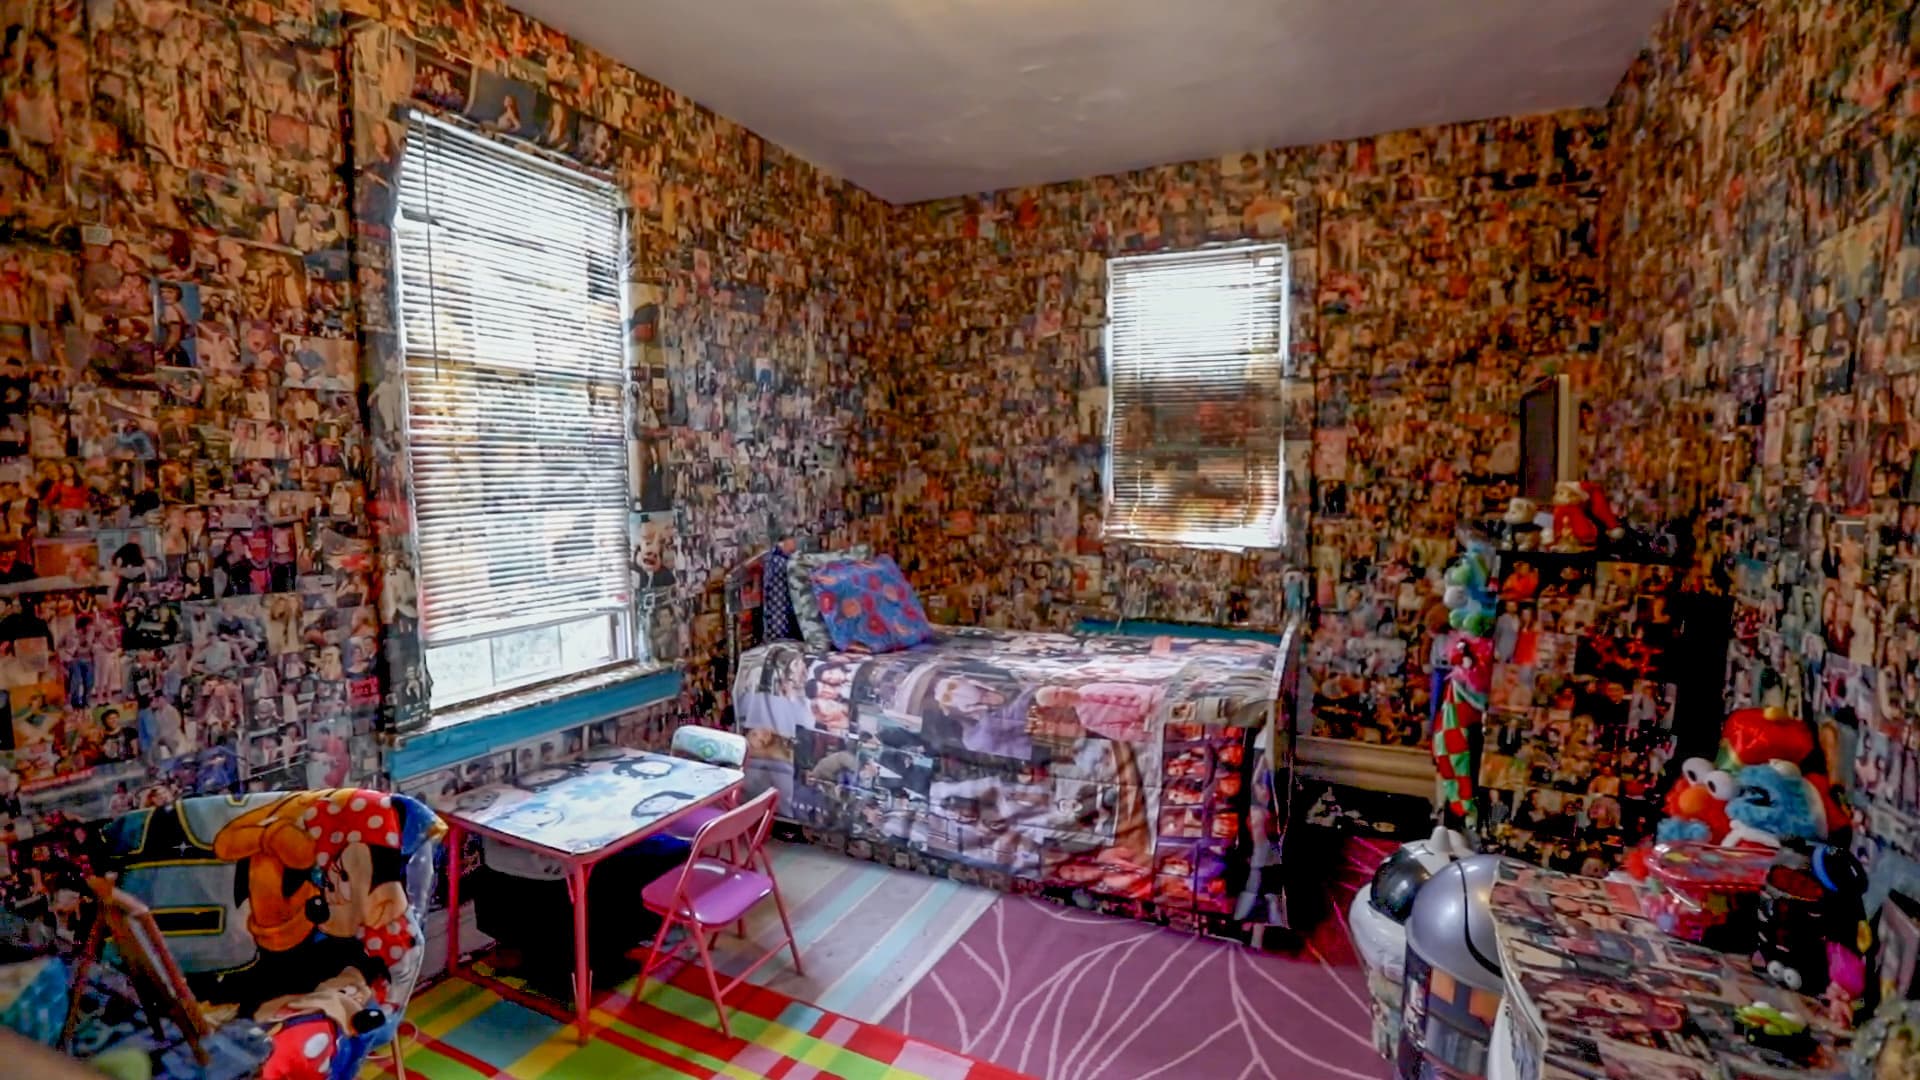 The blinds in Mooney's bedroom were the most difficult surfaces to collage, she says.